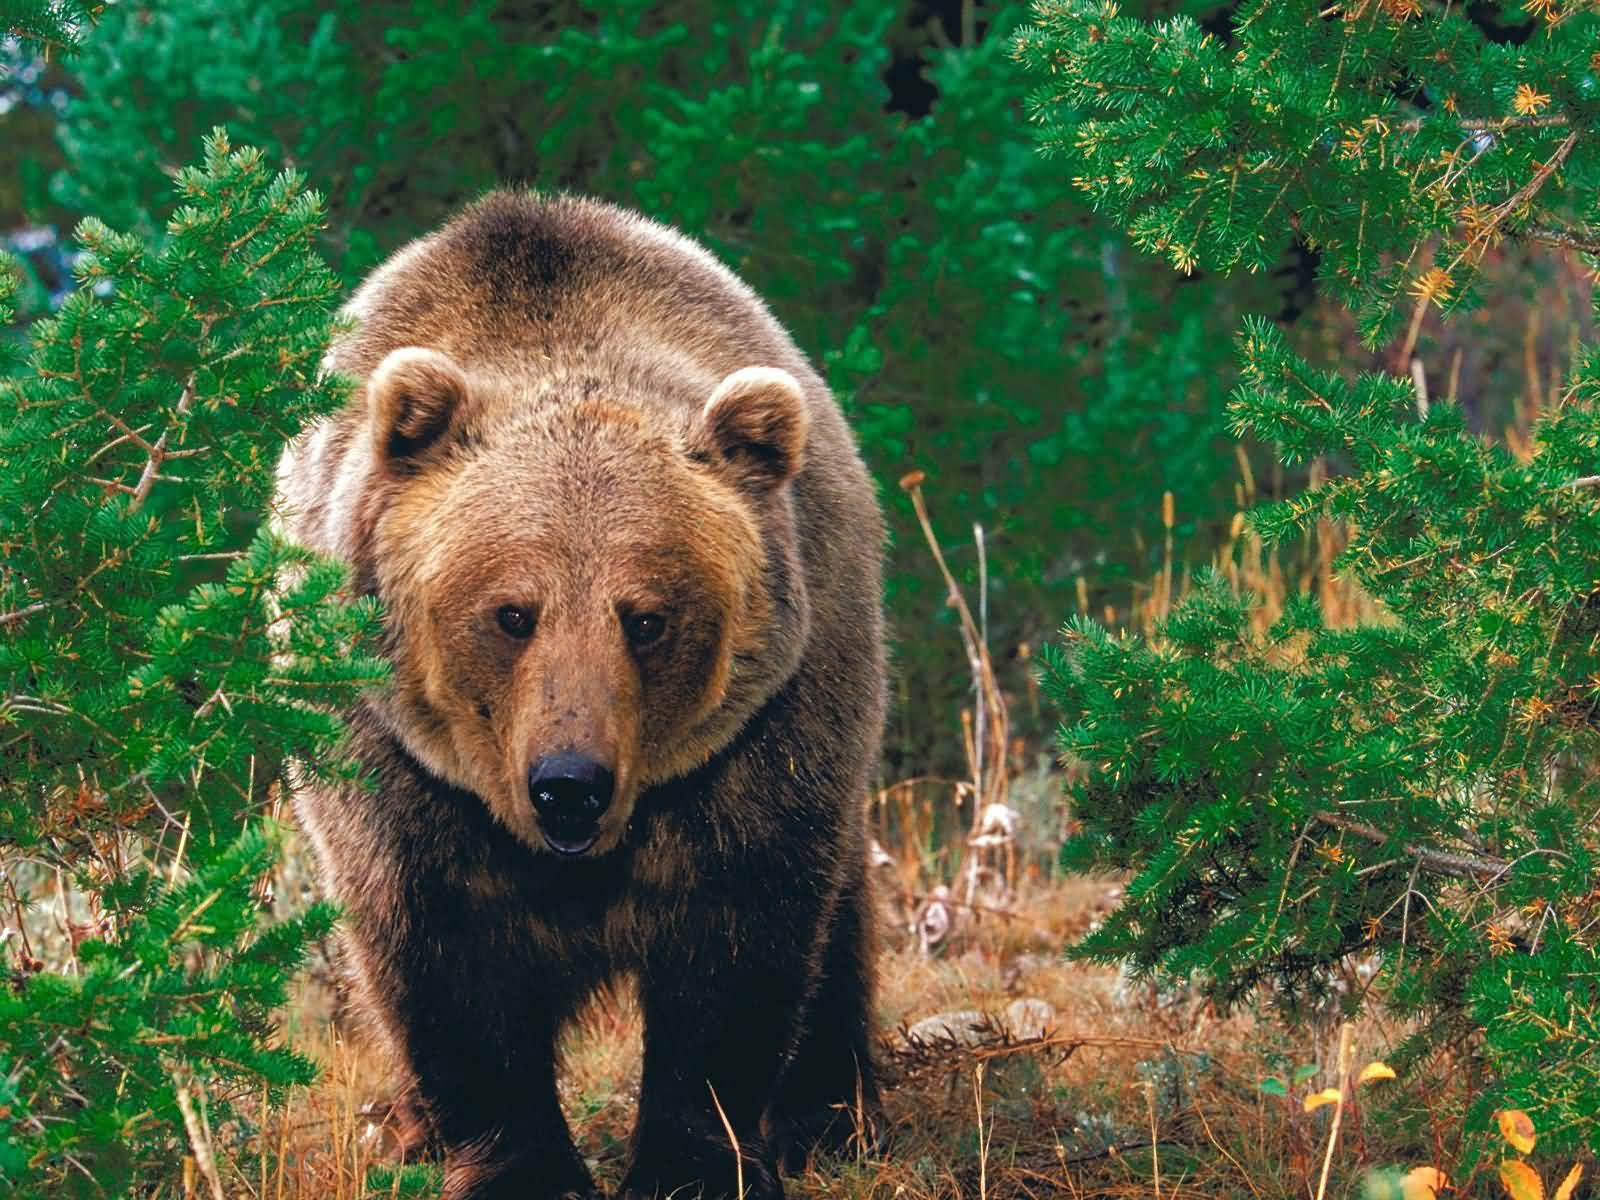 free Grizzly Bear wallpaper wallpapers download